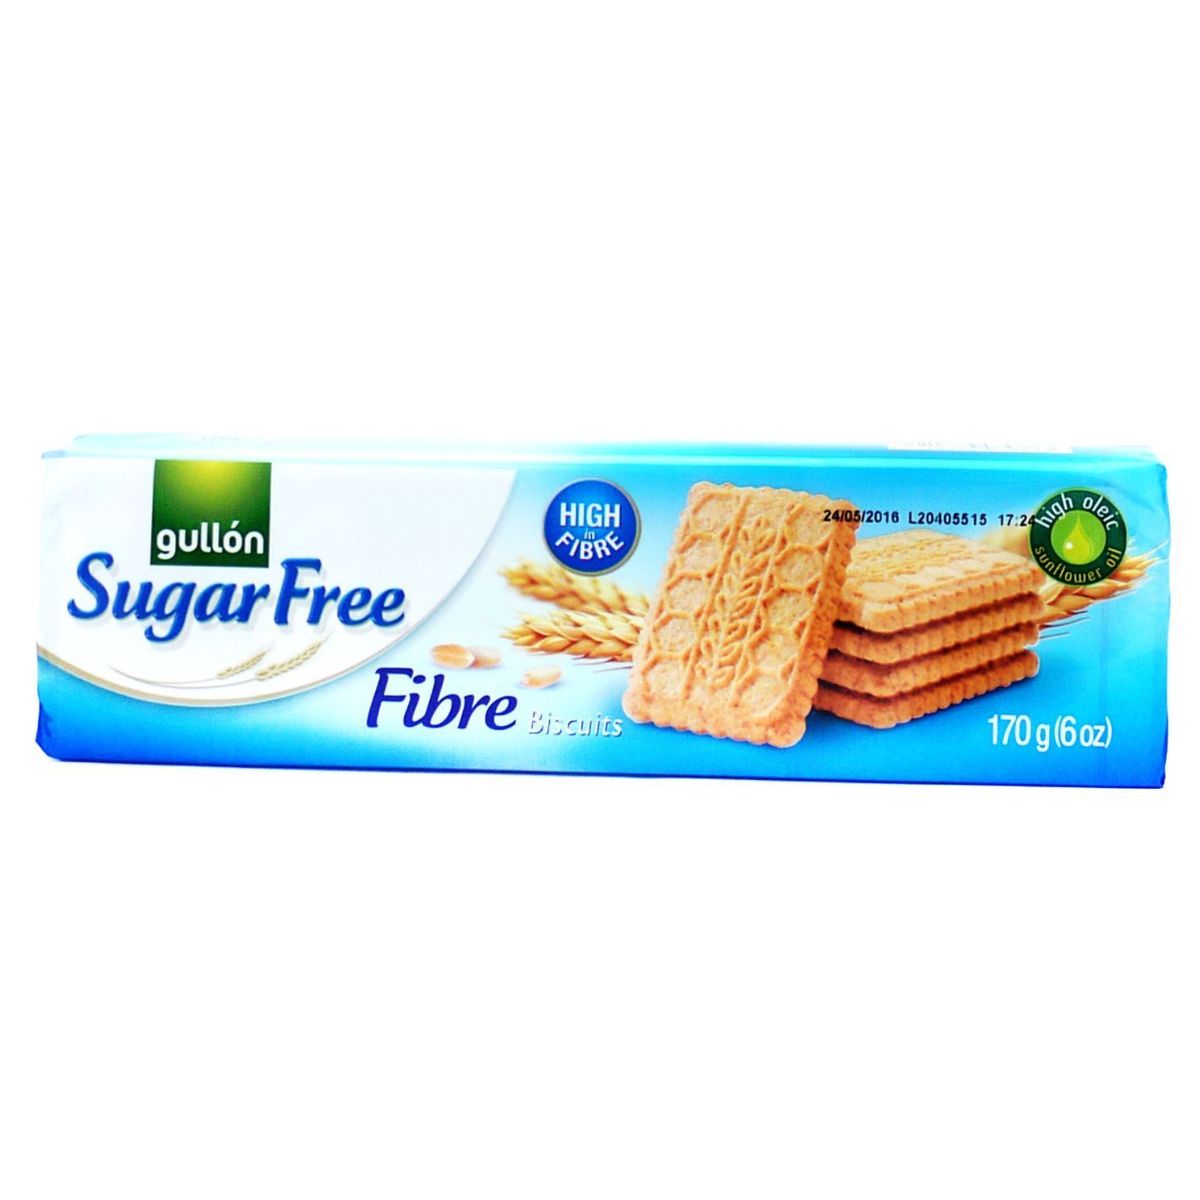 A box of Gullon - Sugar Free Fibre Biscuits - 170g on a white background.